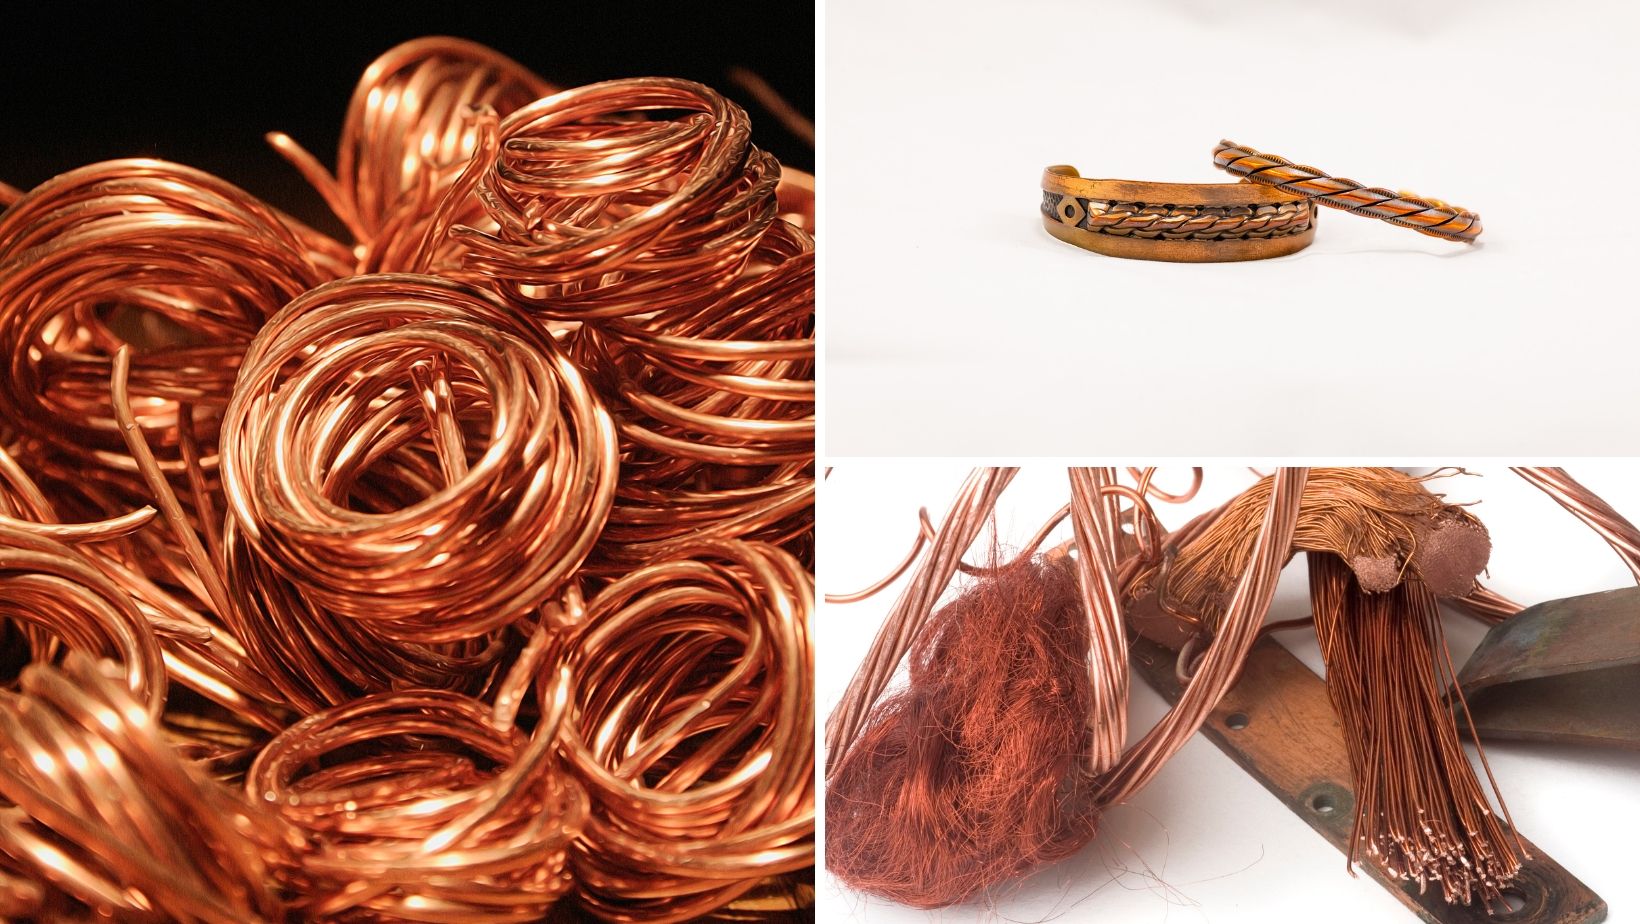 Copper iron strings.